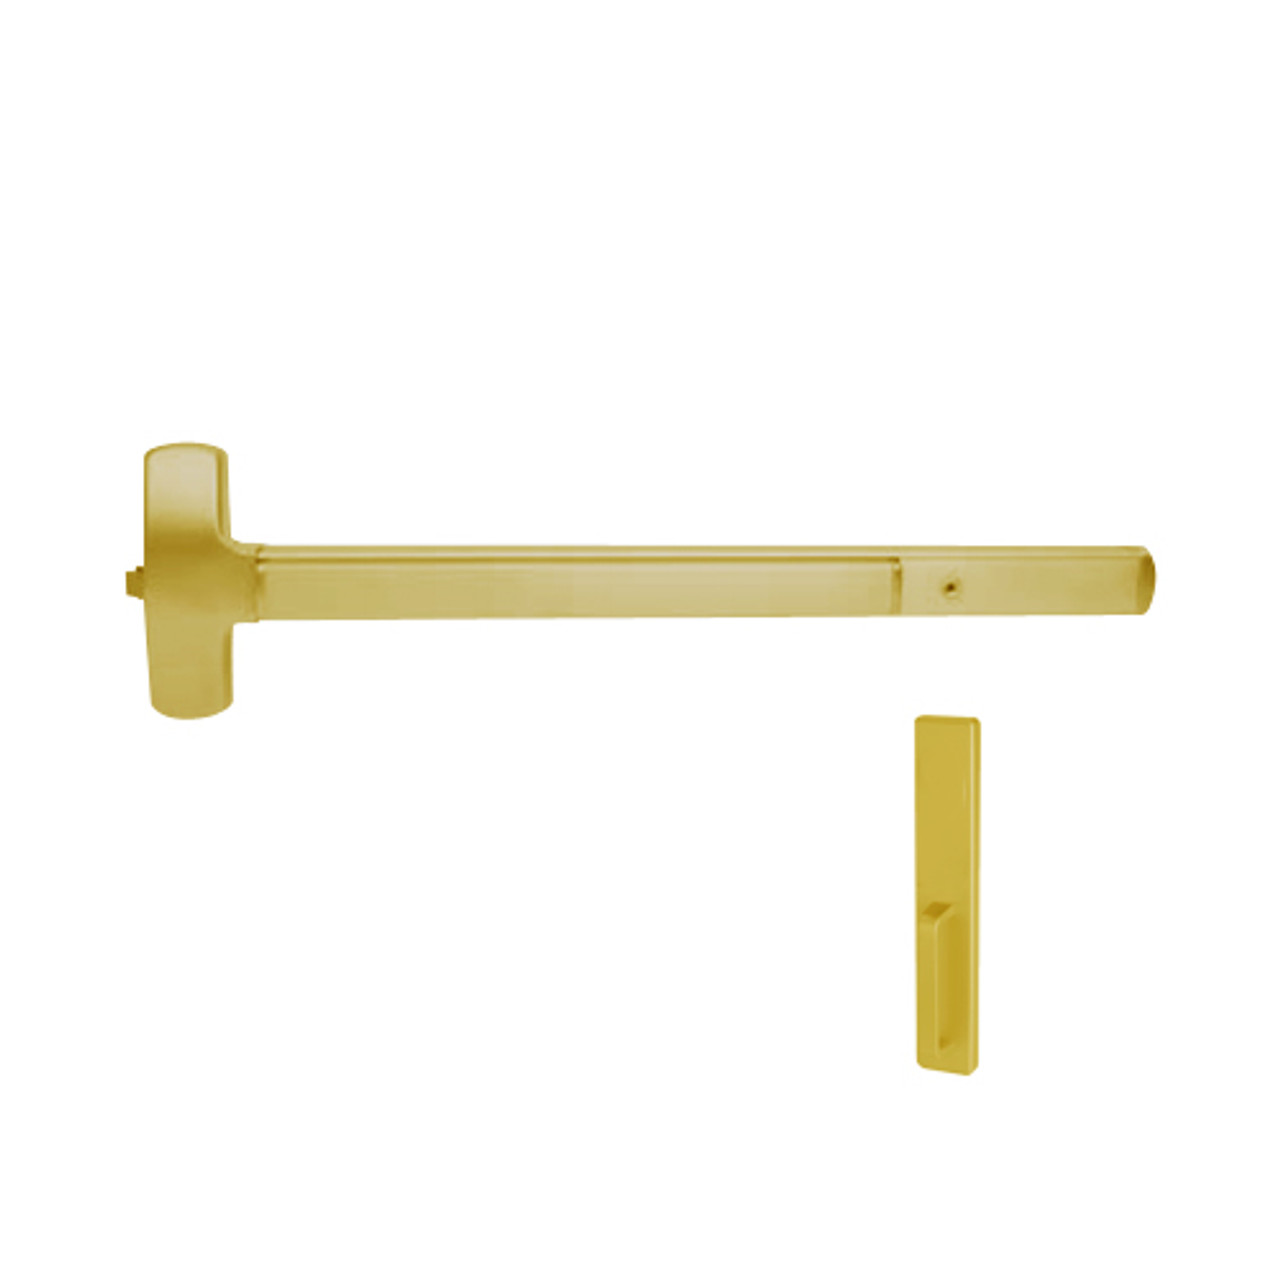 25-R-DT-US3-4 Falcon Exit Device in Polished Brass